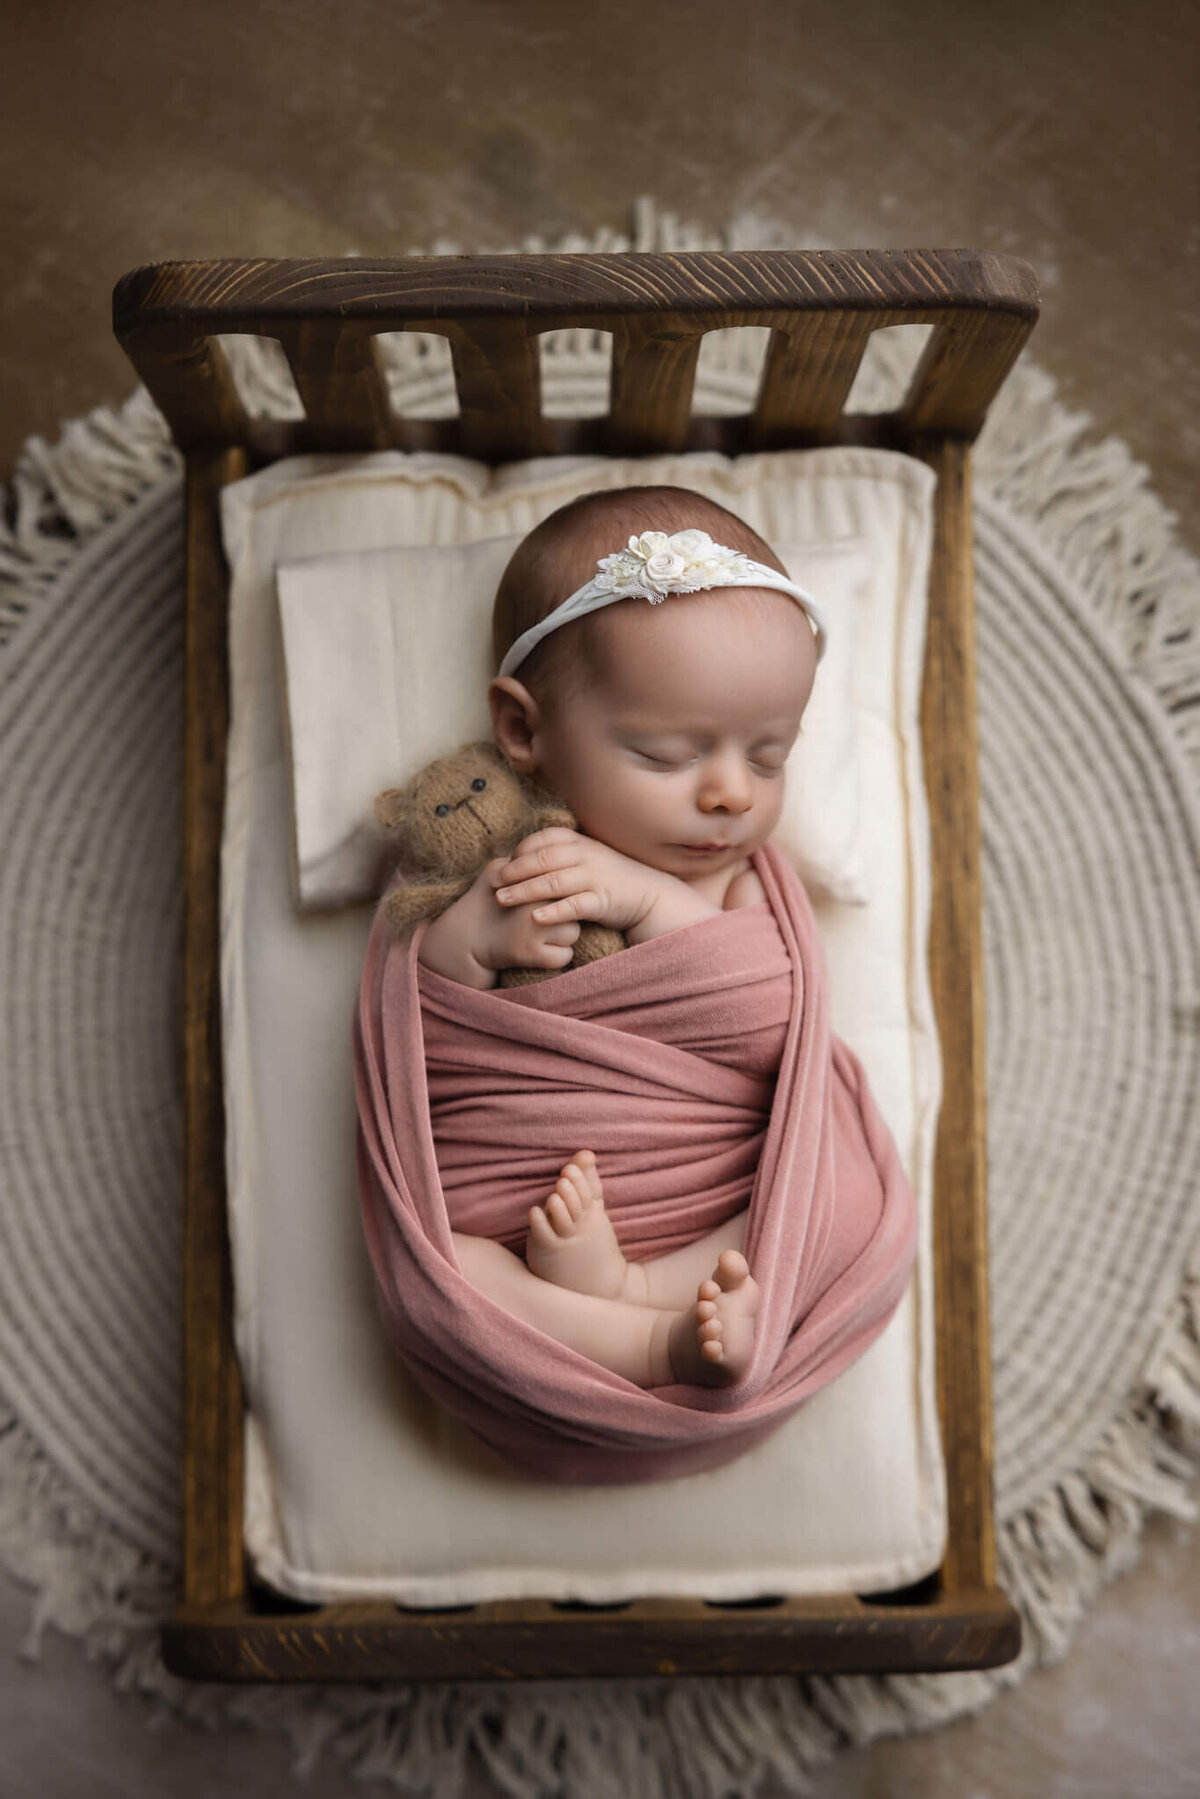 newborn baby wrapped in pink fabric holding a tiny teddy bear sleeping in a tiny wooden bed